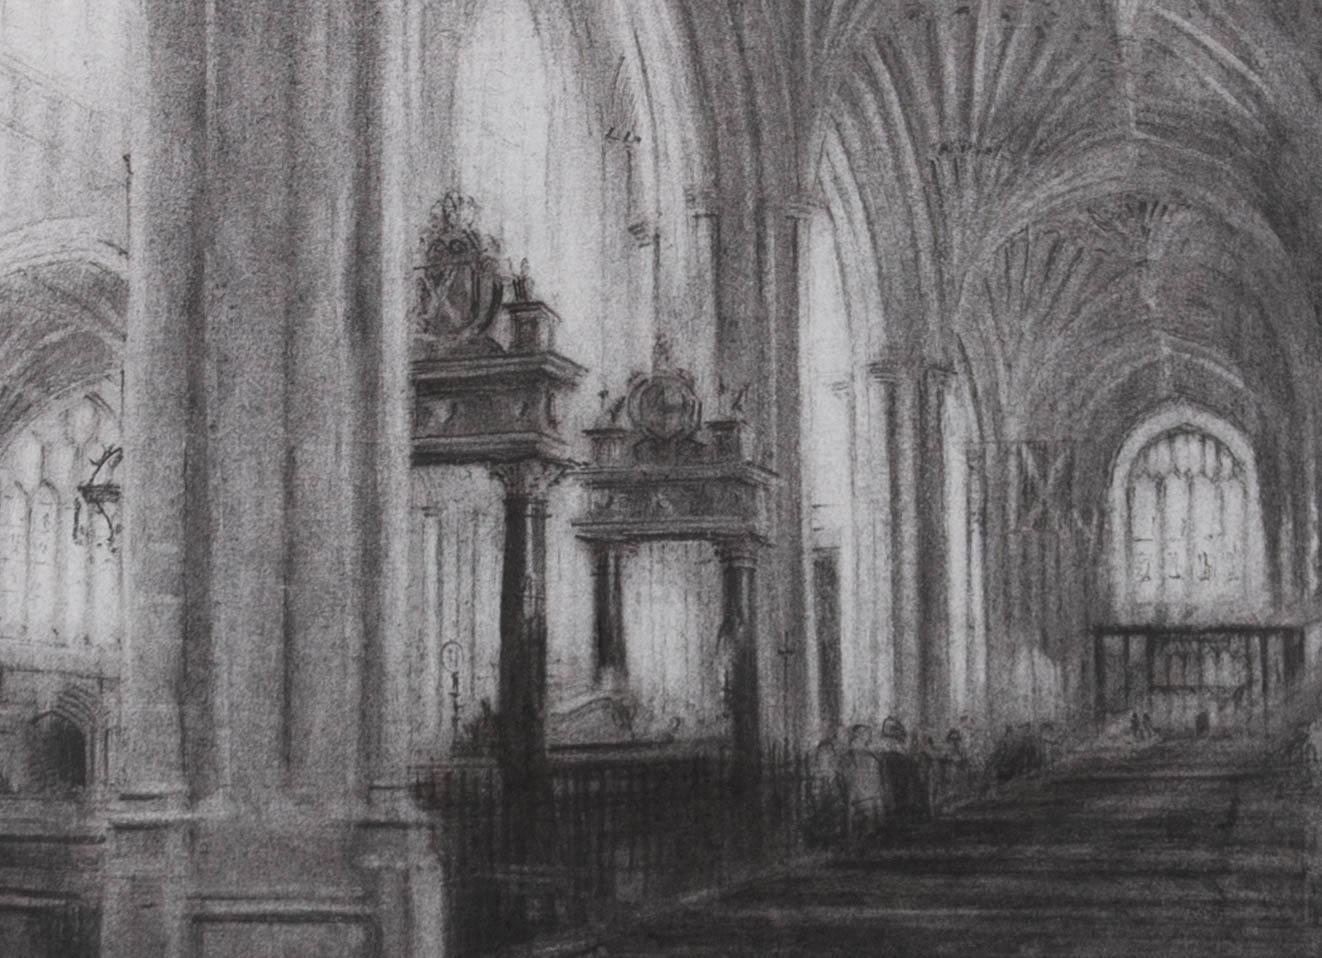 A spectacular charcoal depiction of the impressive interior of Bath abbey. The artist has captured the vaulted ceilings and darkened tombs with wonderful ease in a notoriously tricky medium to work with. The drawing has been presented in a fine